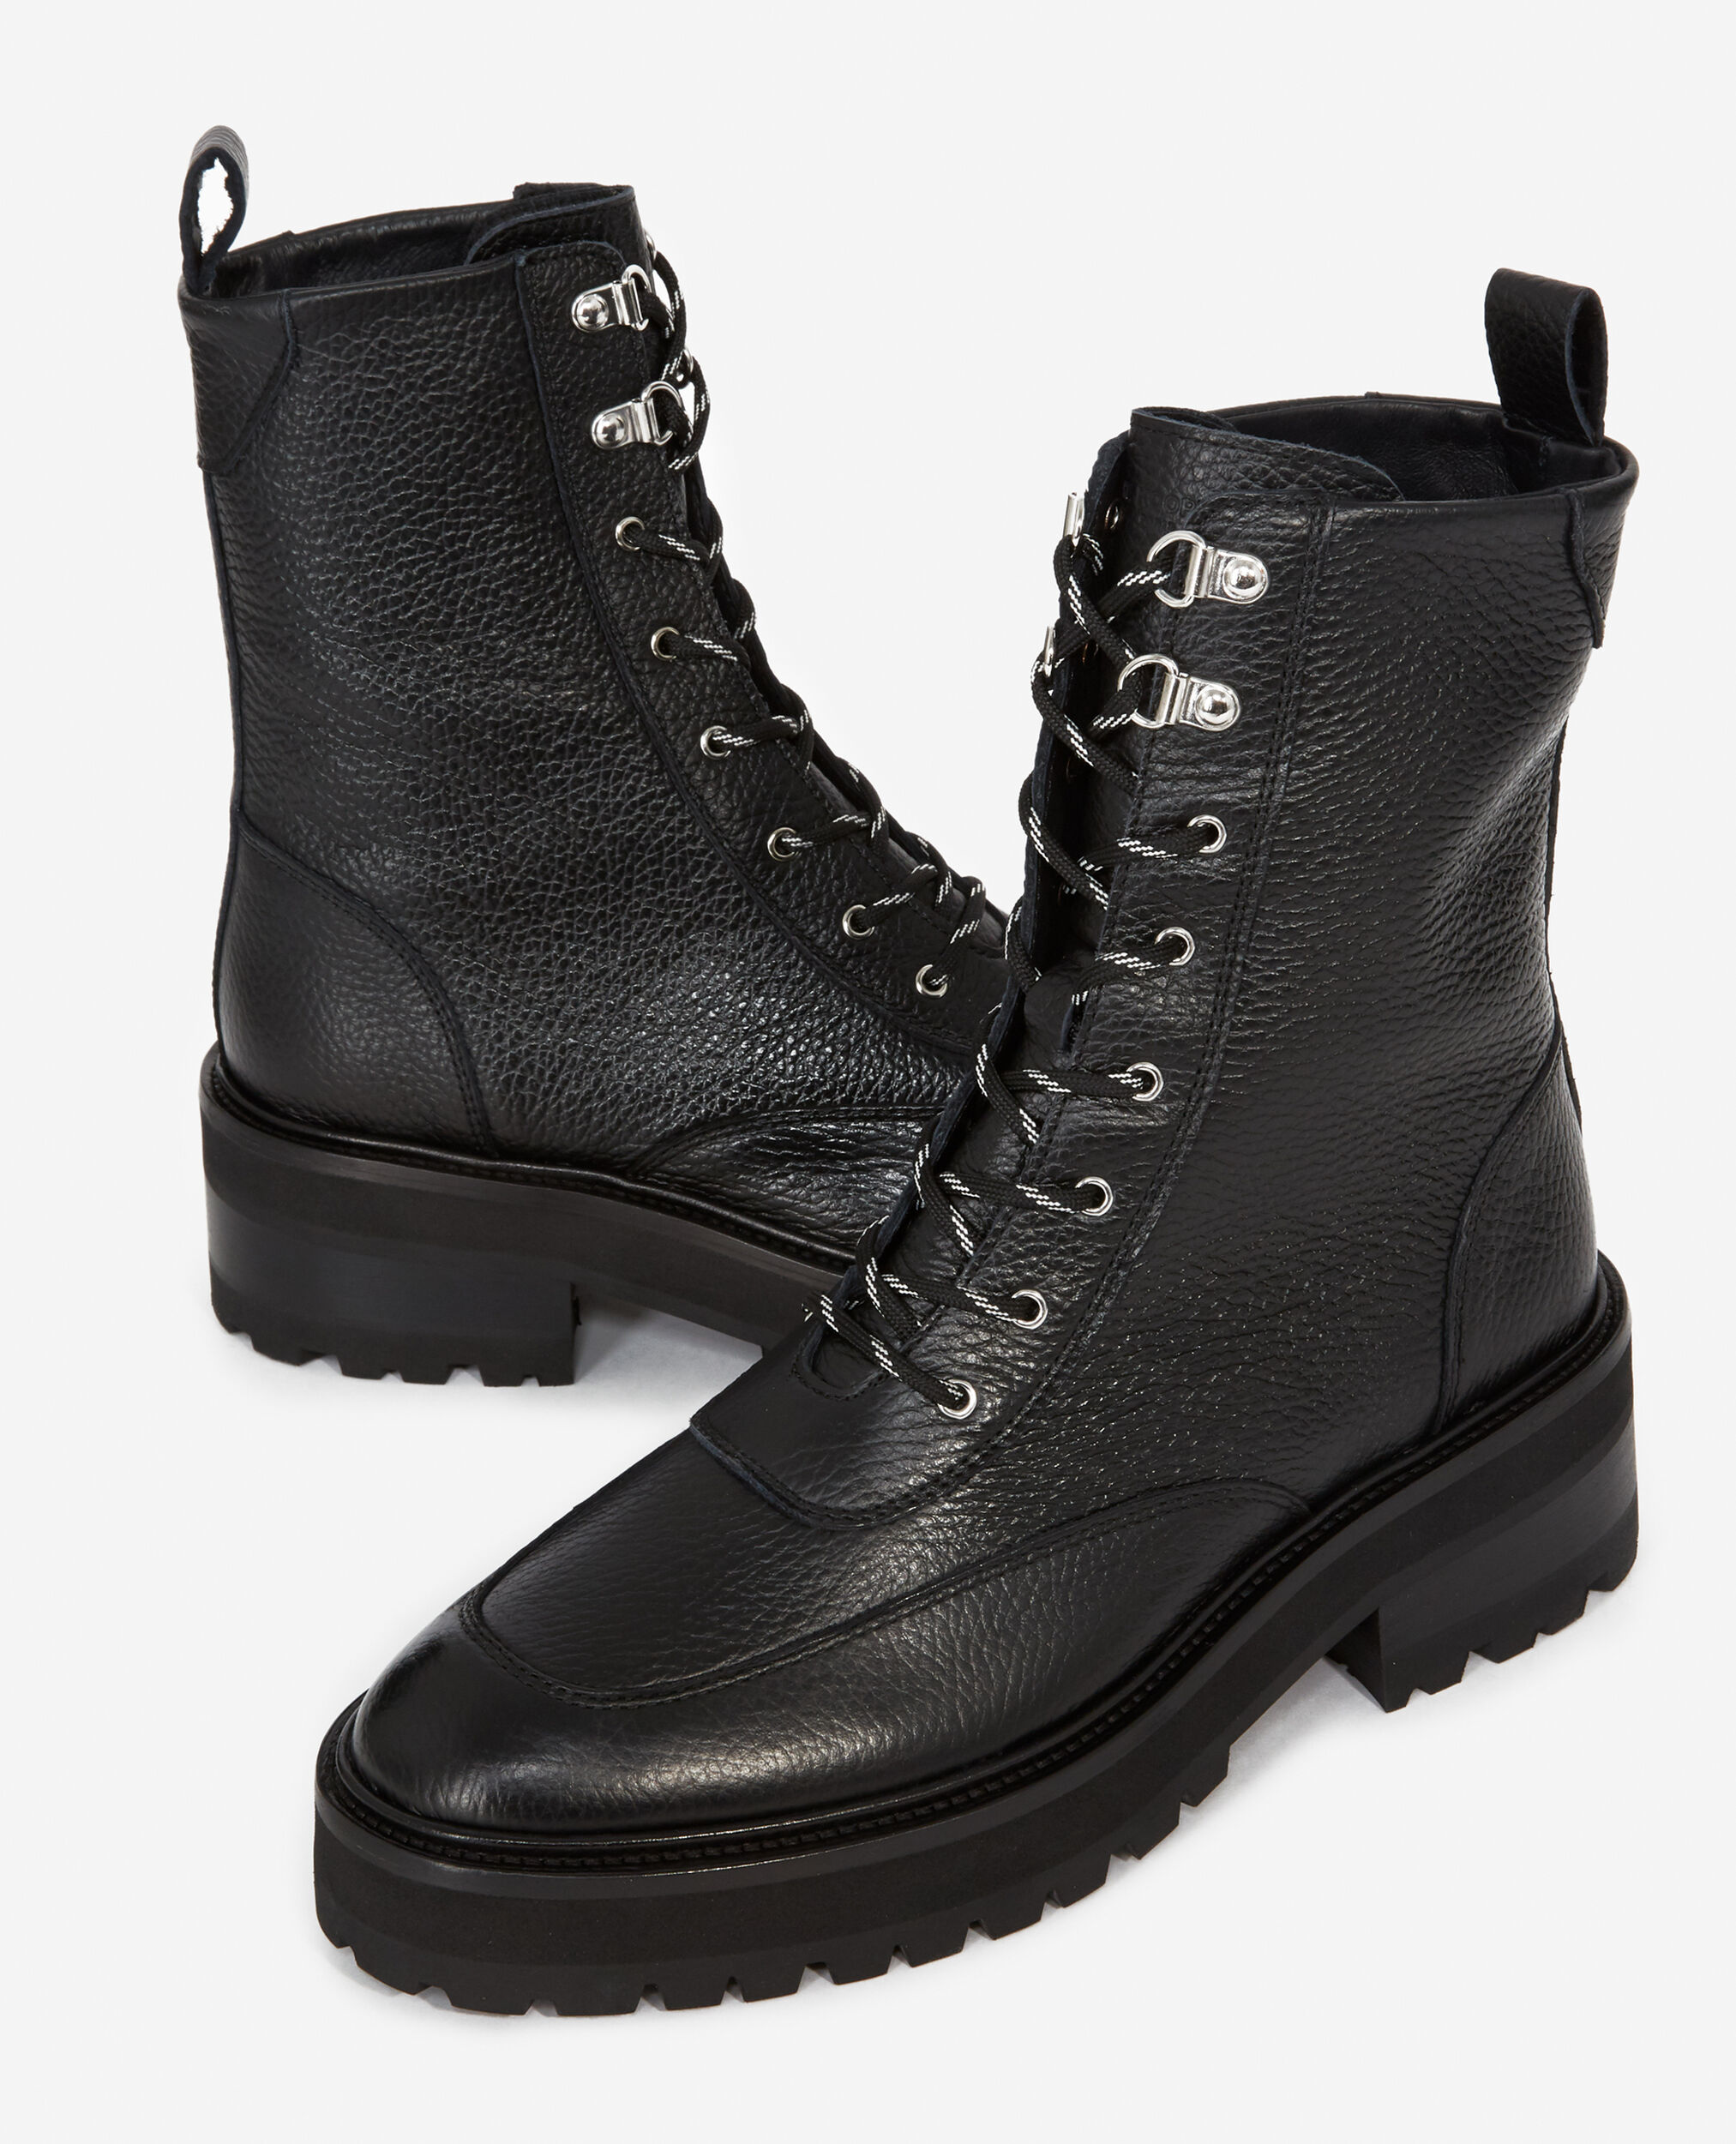 High black leather boots in ranger style | The Kooples - US